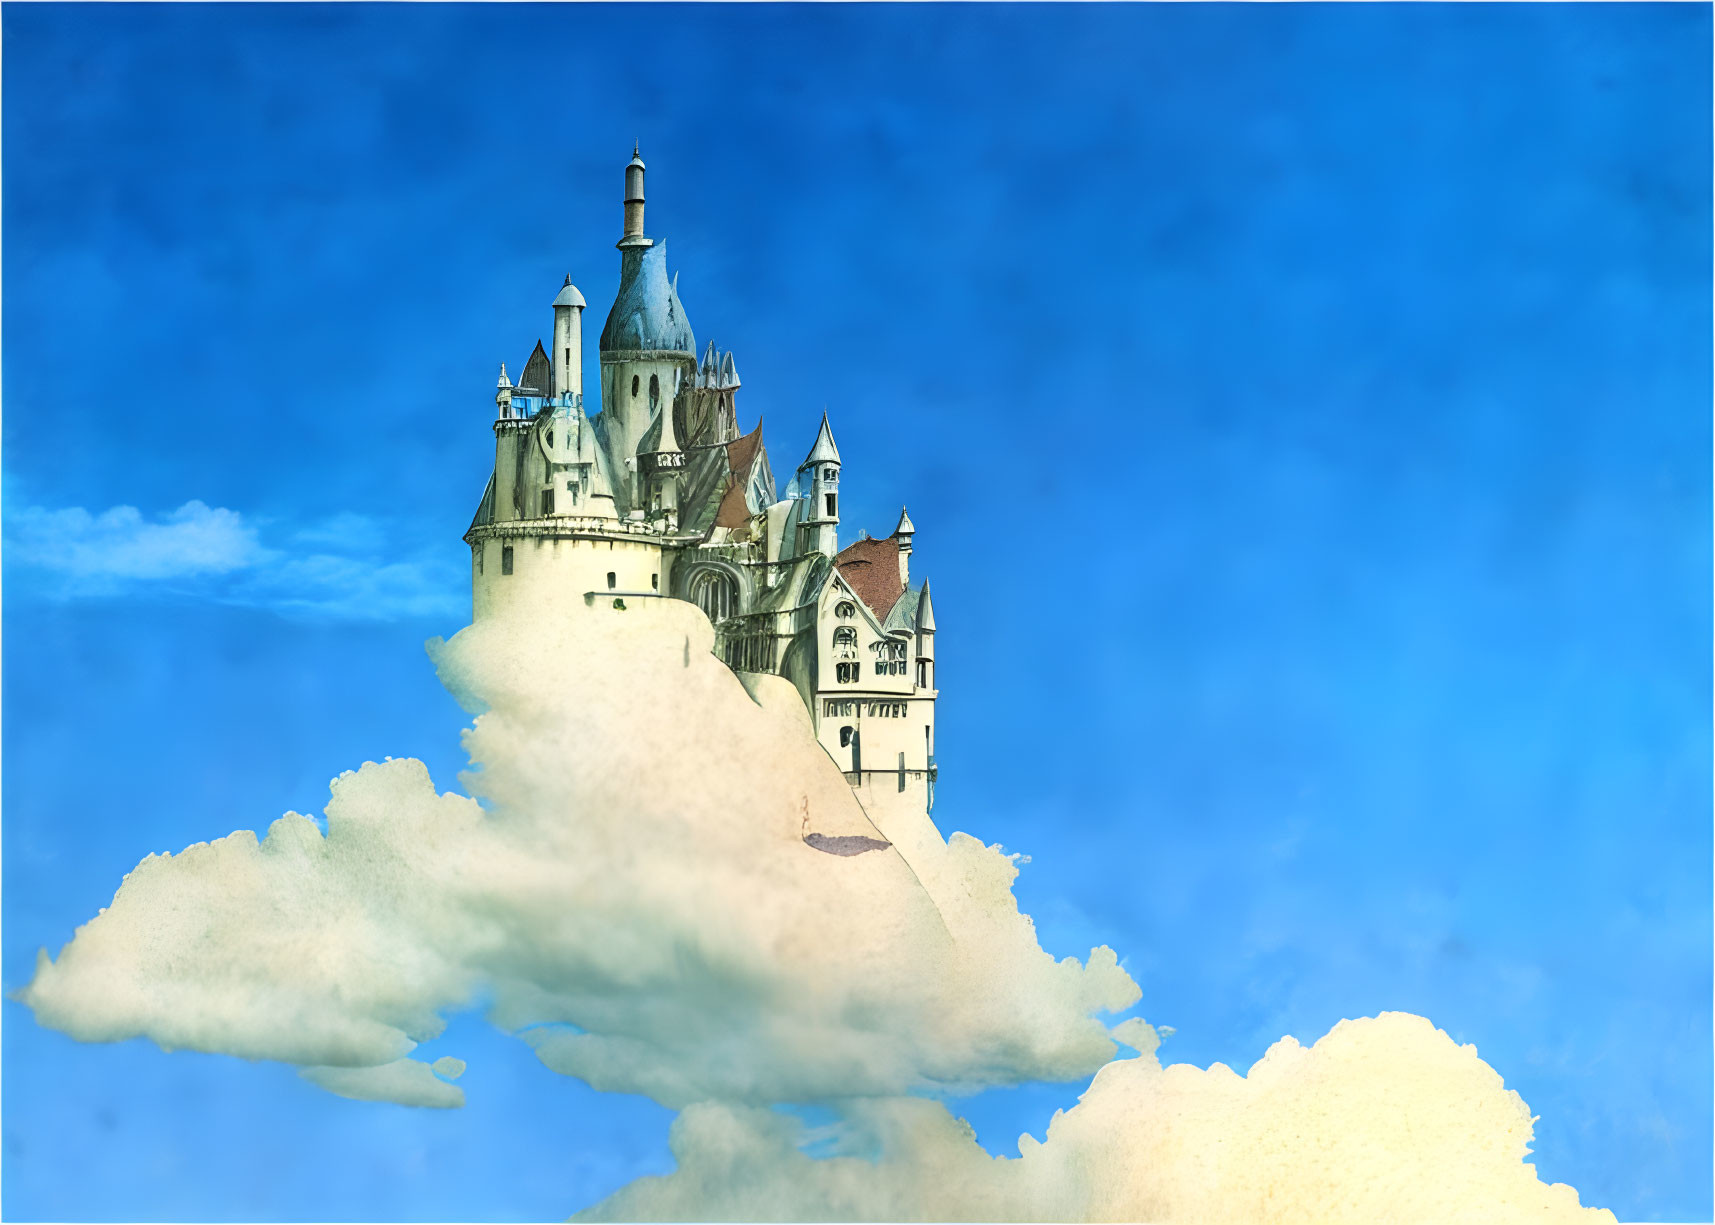 Whimsical fairytale castle in fluffy clouds against blue sky